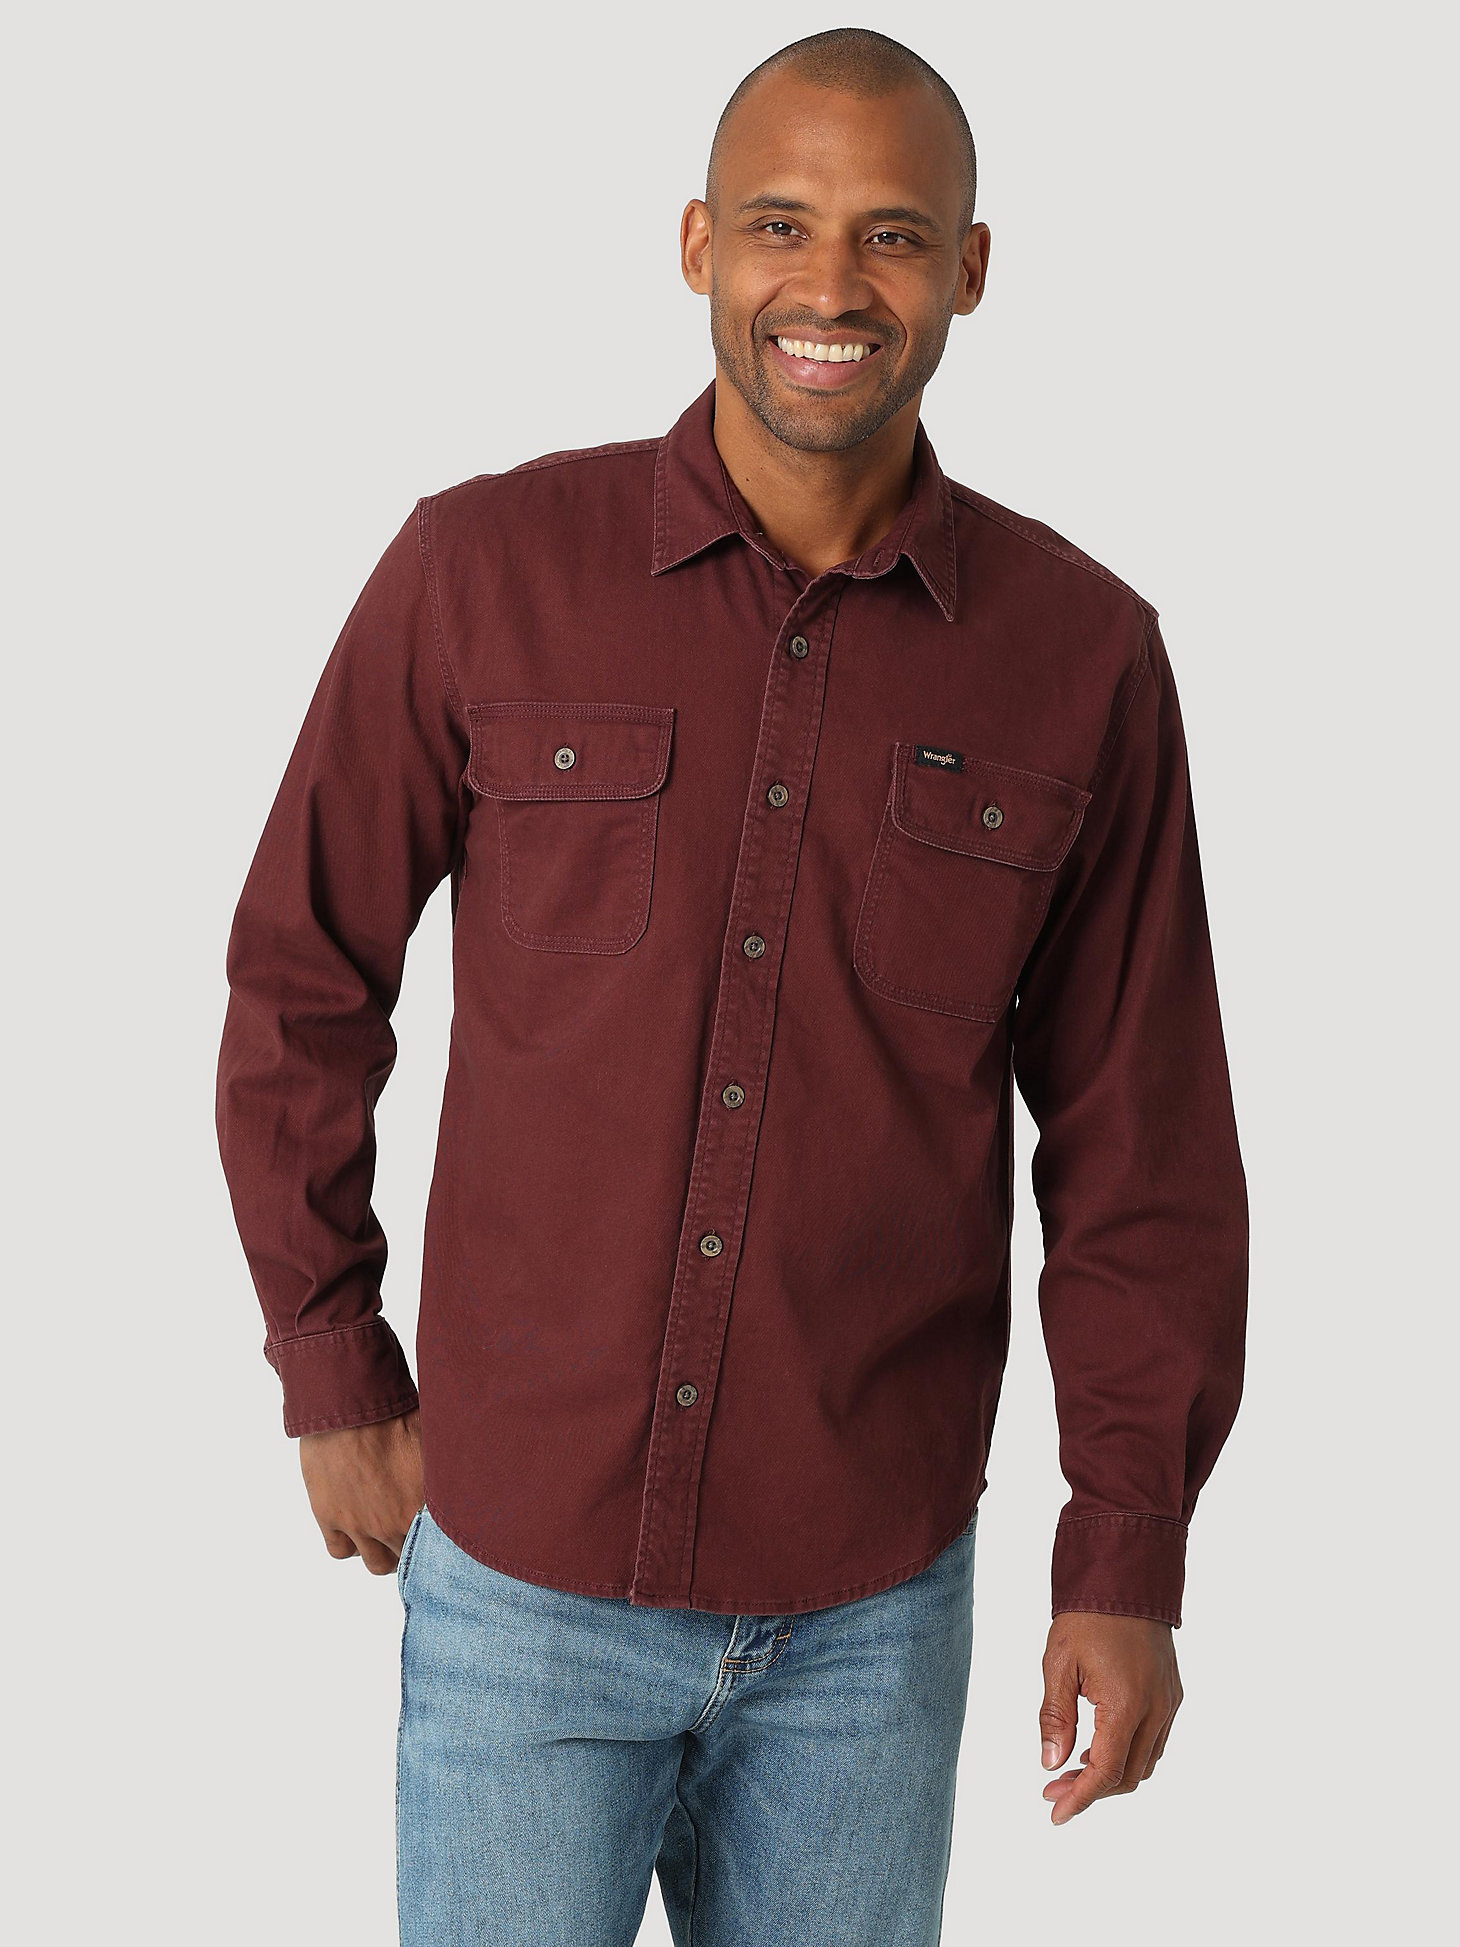 Men's Wrangler® Epic Soft™ Stretch Twill Shirt in Decadent Chocolate main view